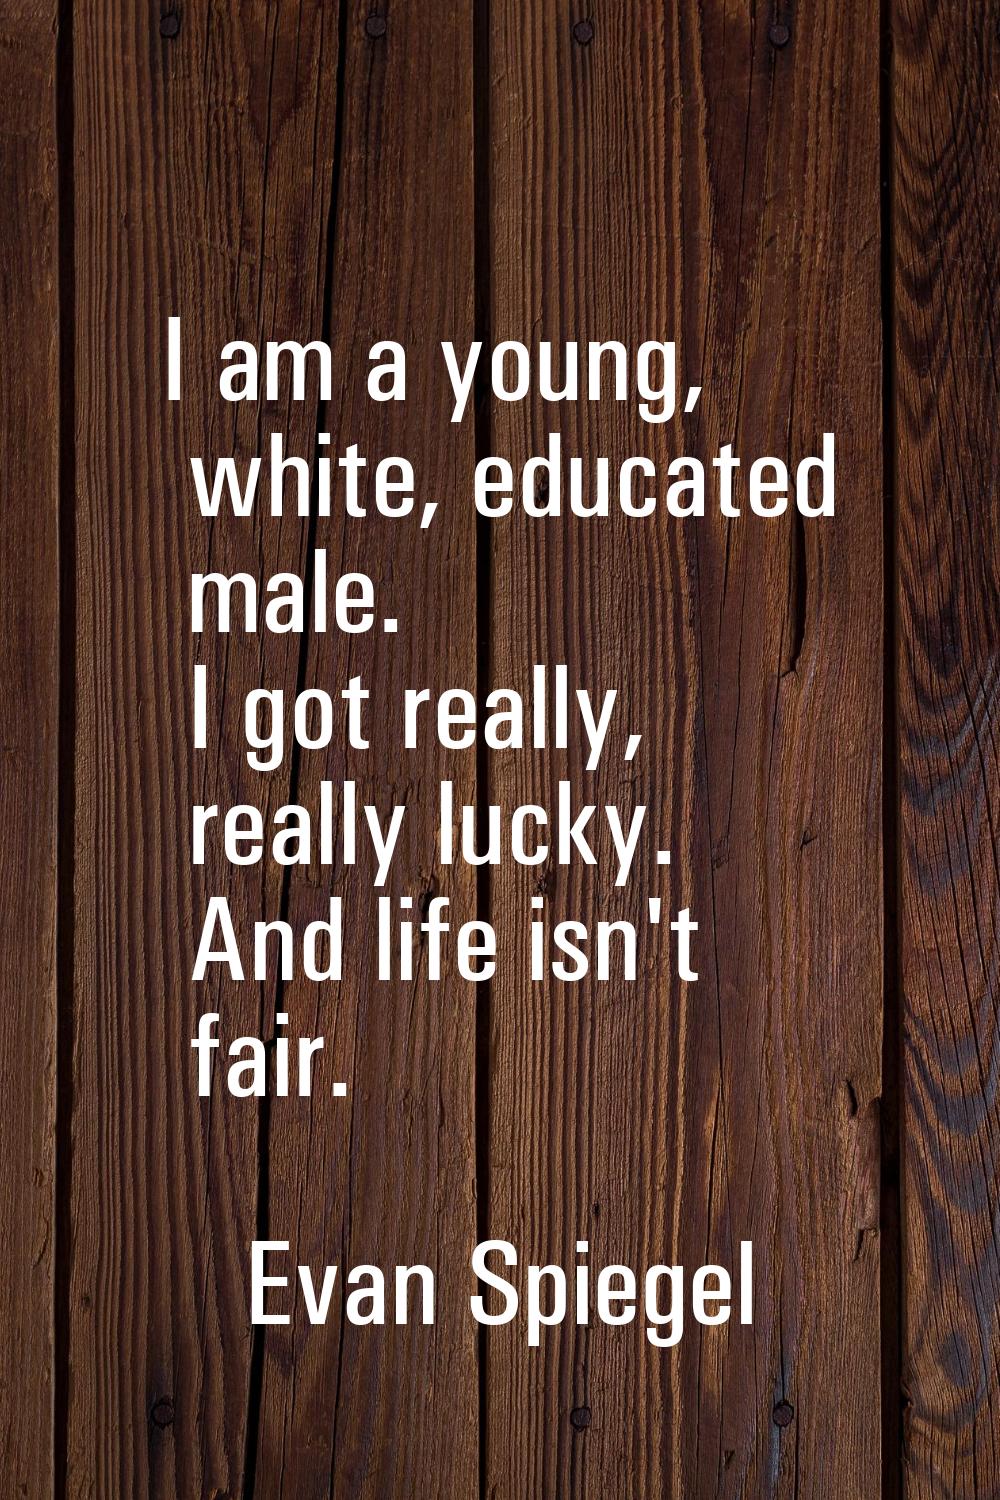 I am a young, white, educated male. I got really, really lucky. And life isn't fair.